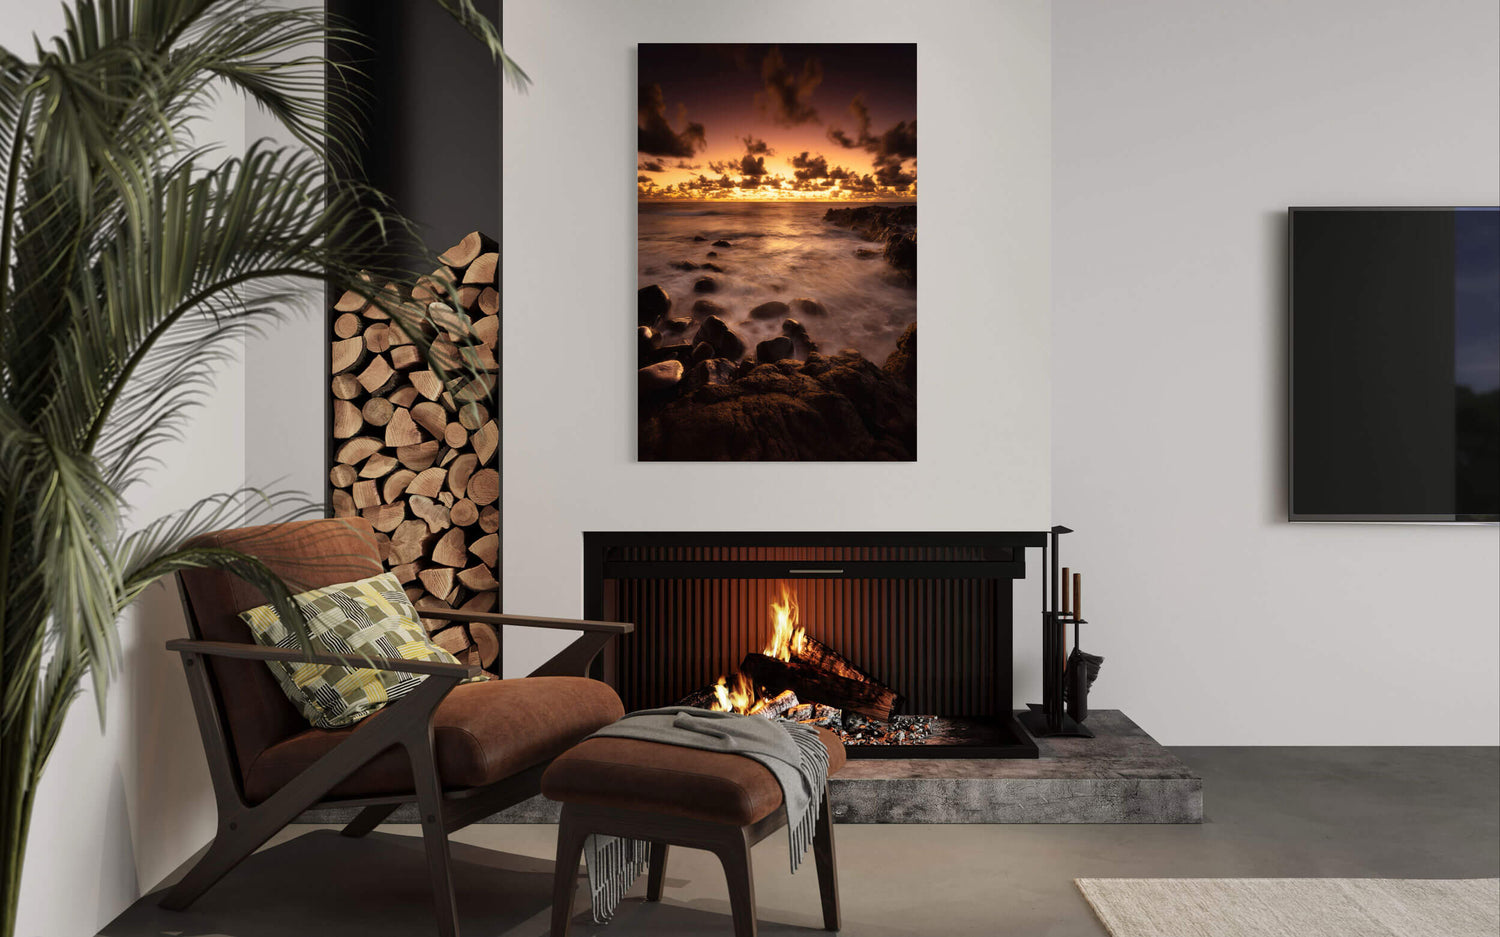 A piece of Kauai art showing a Kapaa sunrise picture hangs in a living room.